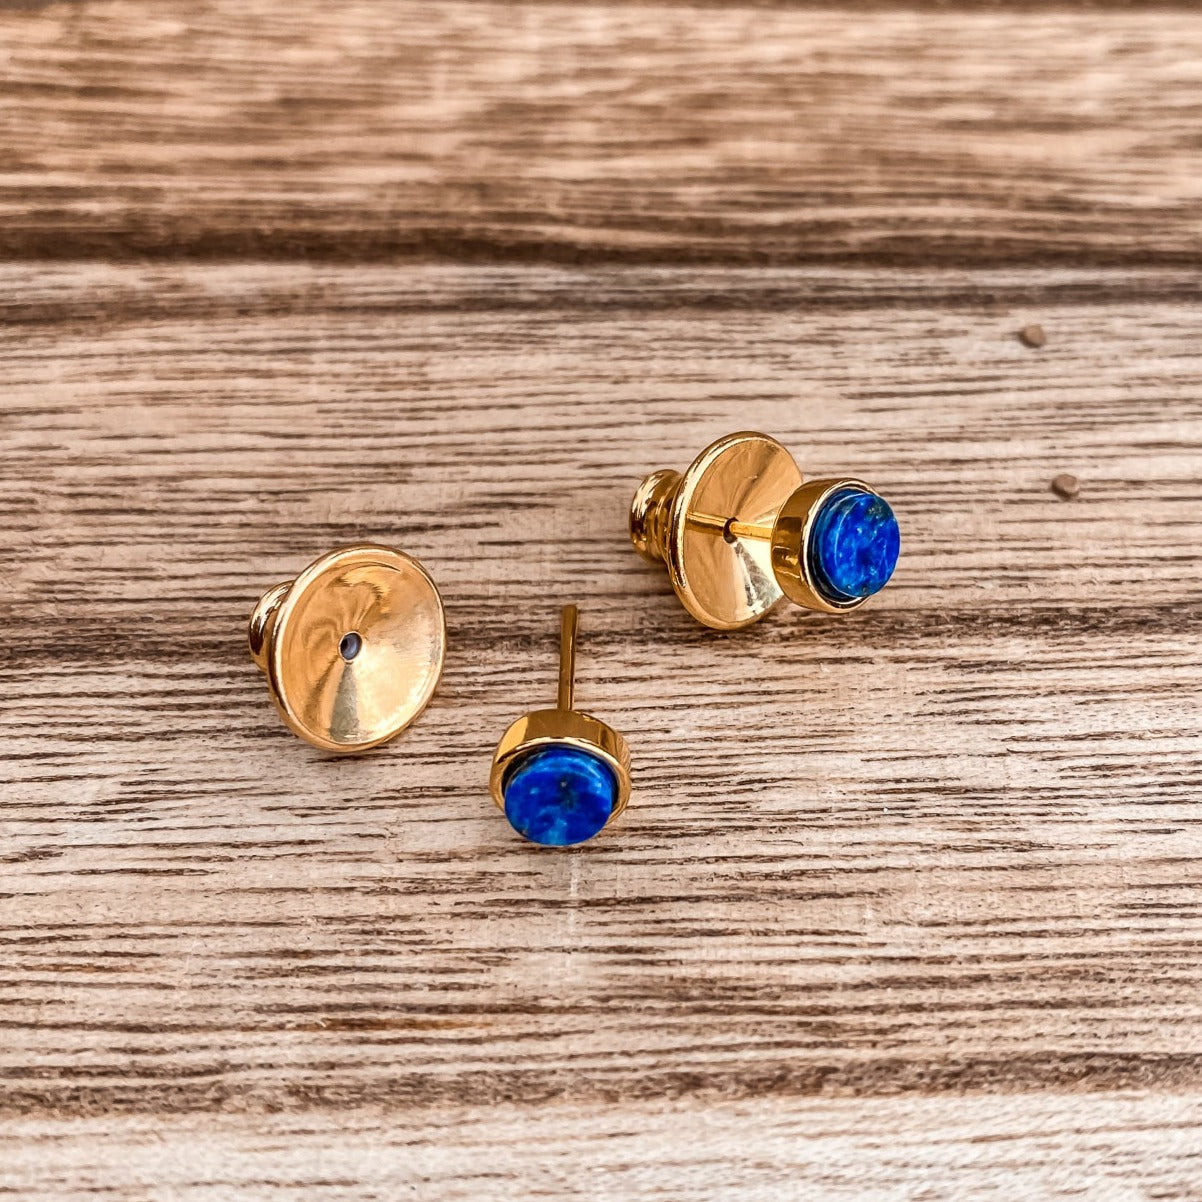 5mm Yellow Gold Plated Round Stud Earrings in Royal Blue Lapis Lazuli Gemstone made By Born To Rock. Online Jewelry store Based in San Diego California